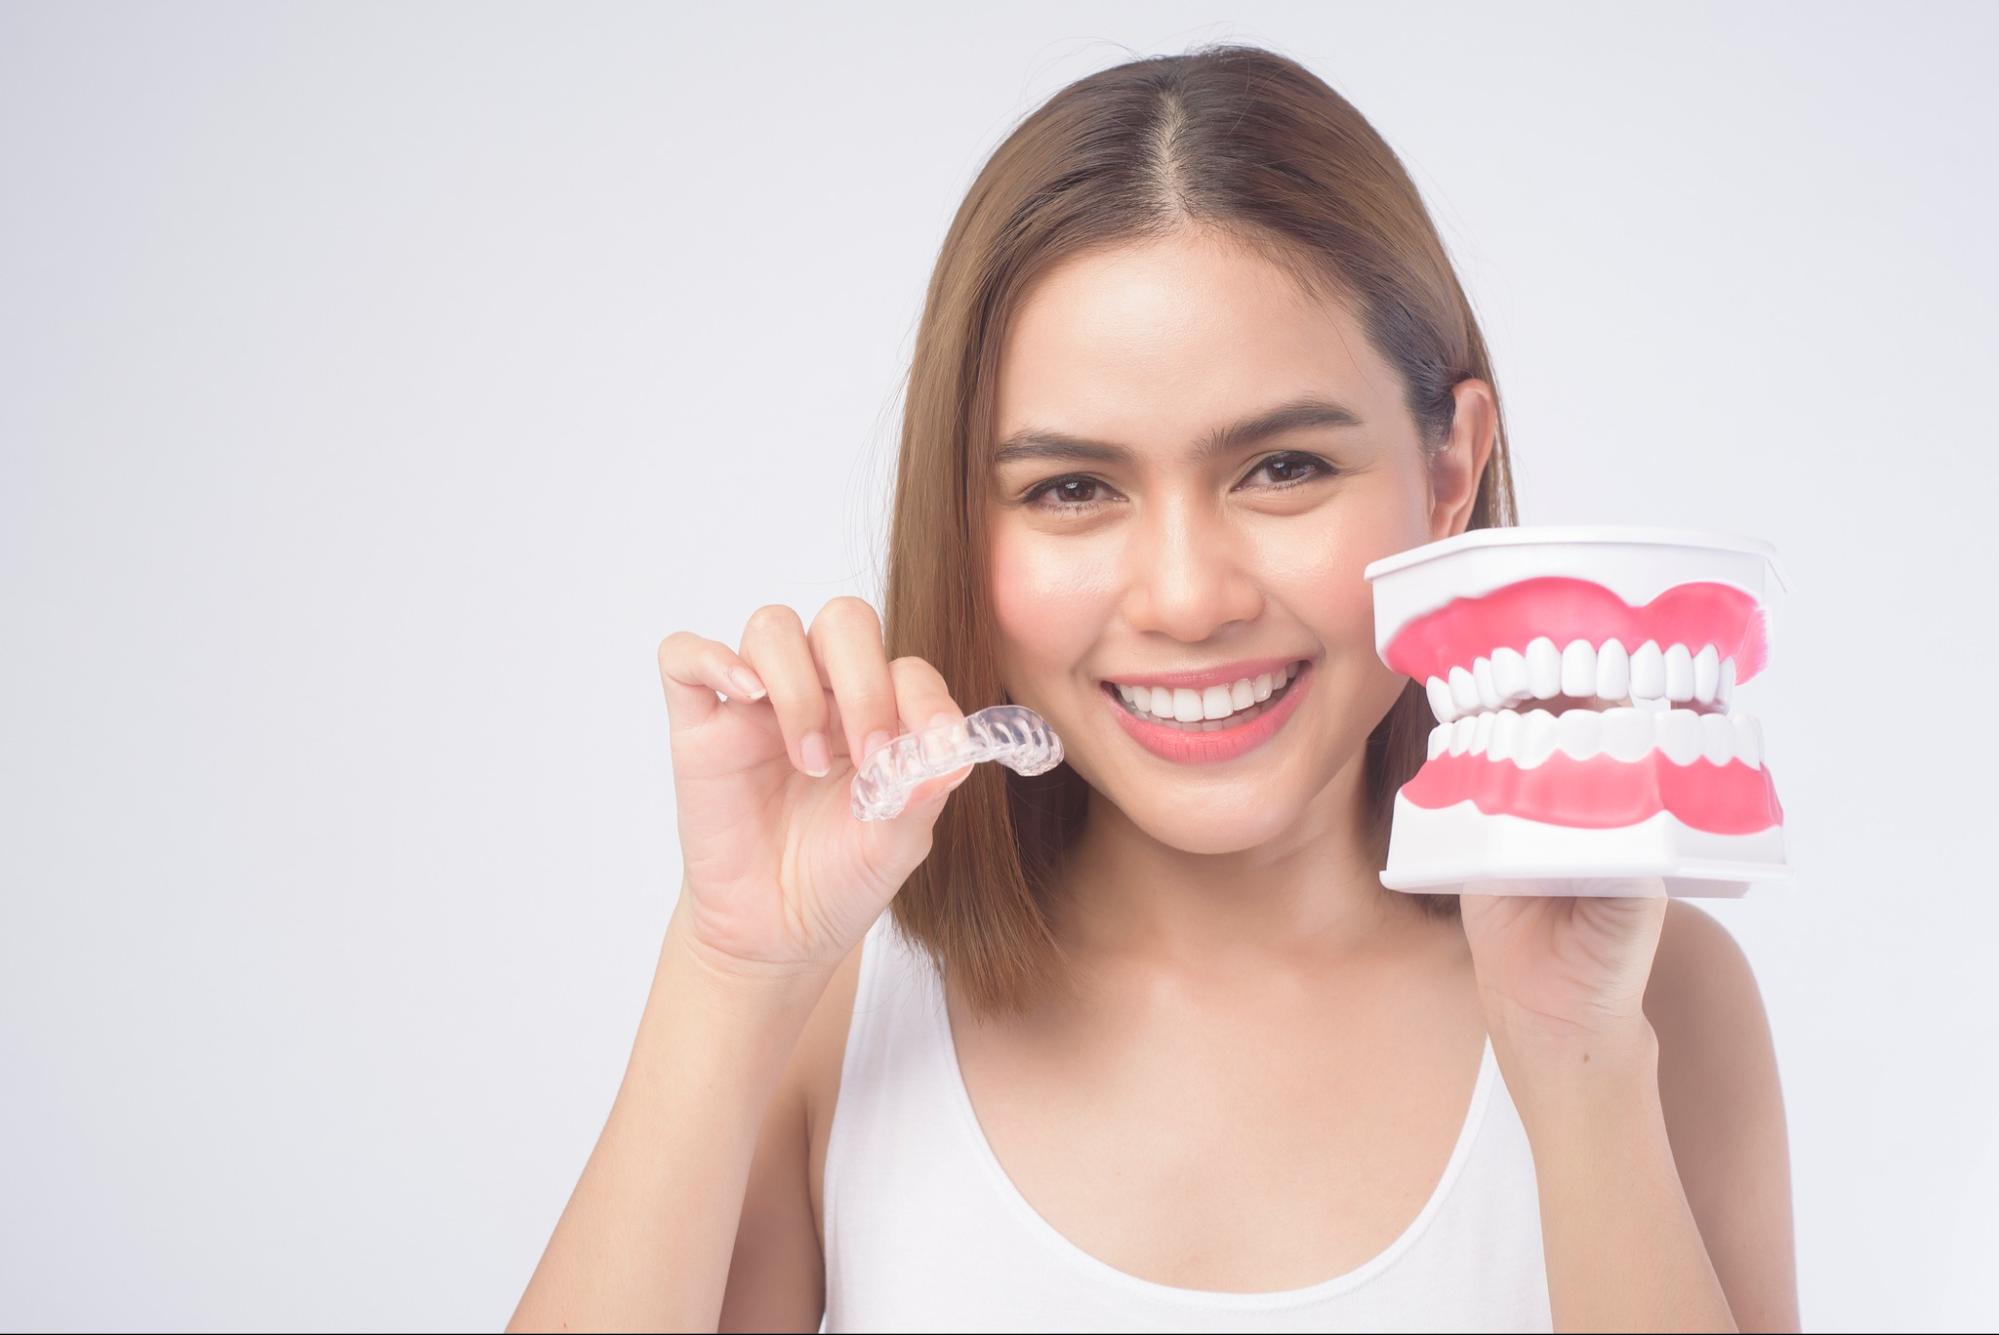 How to Get The Most Out of Aligner Treatment